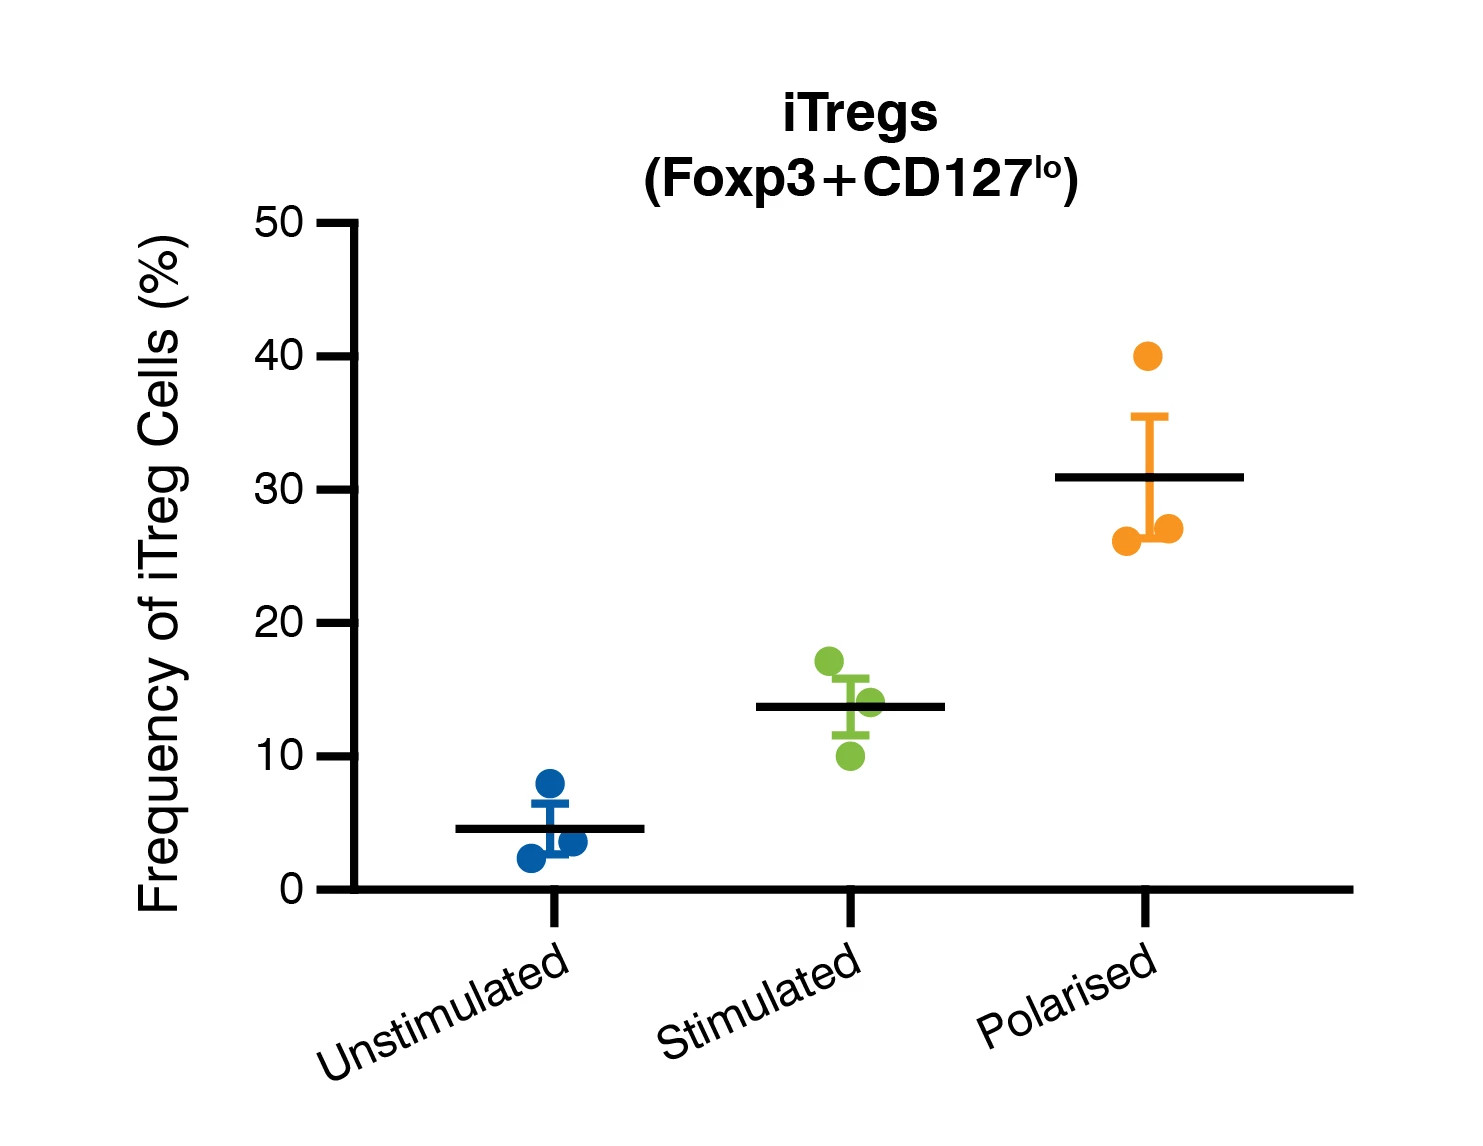 Graphs showing an in vitro phenotypic iTreg assay